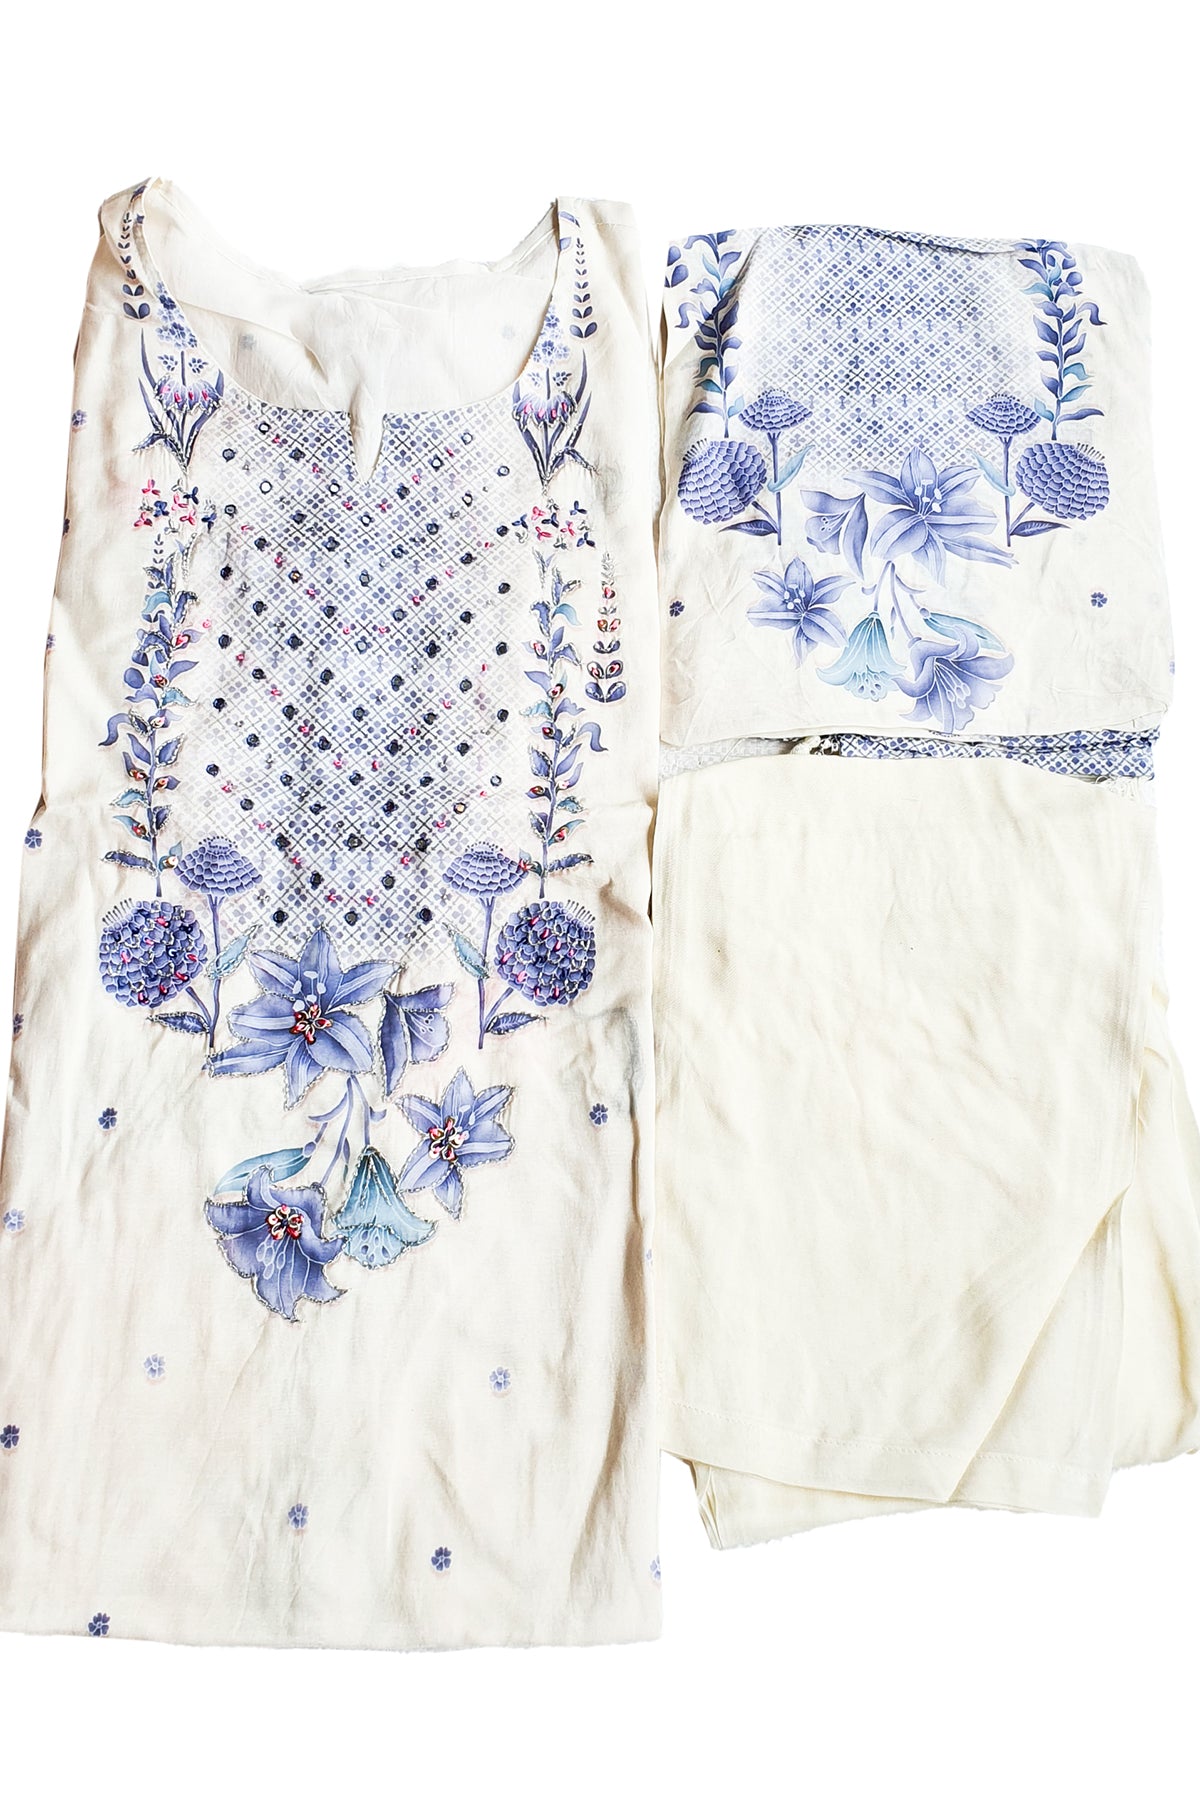 Cream & Blue Floral Printed Muslin Embroidered Suit with Pants Set